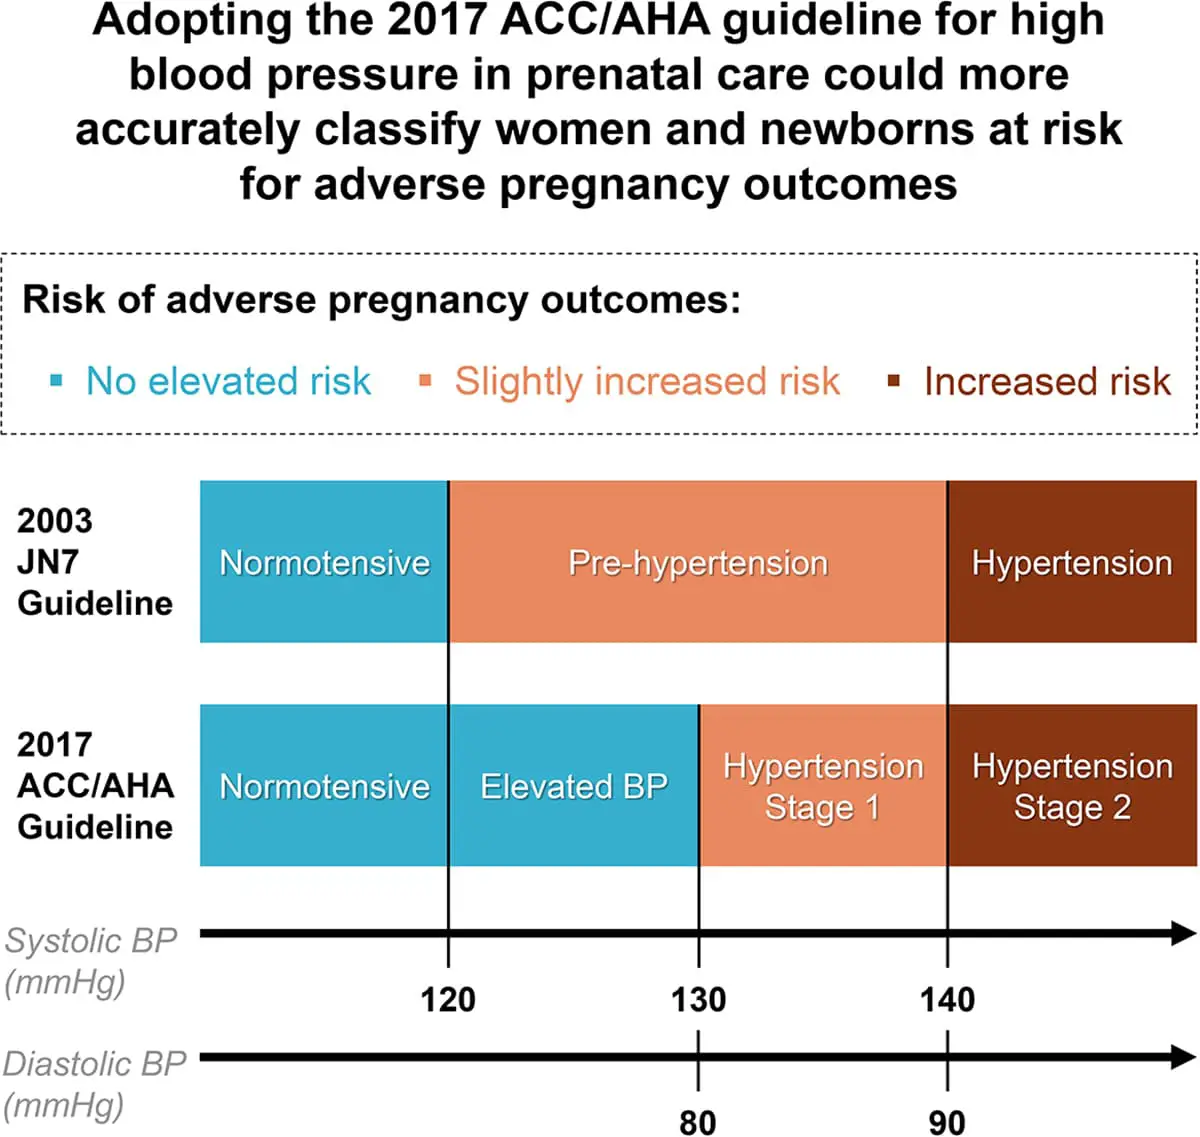 Impact of the 2017 ACC/AHA Guideline for High Blood Pressure on ...